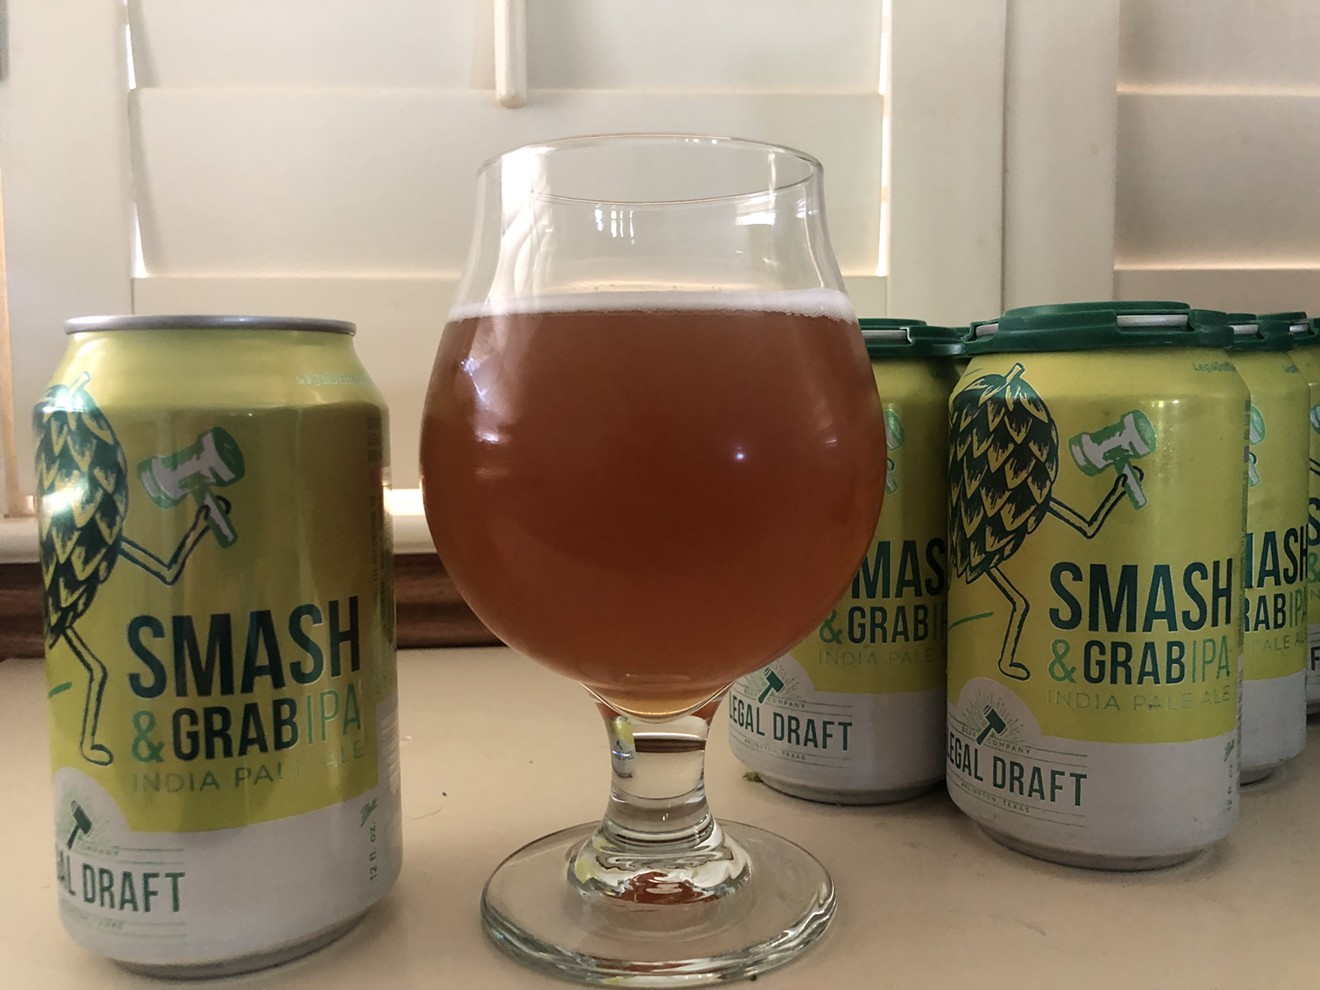 Legal Draft's Smash and Grab IPA is a traditional American IPA but has lots of herbal flavors that make it a great spring sipper.